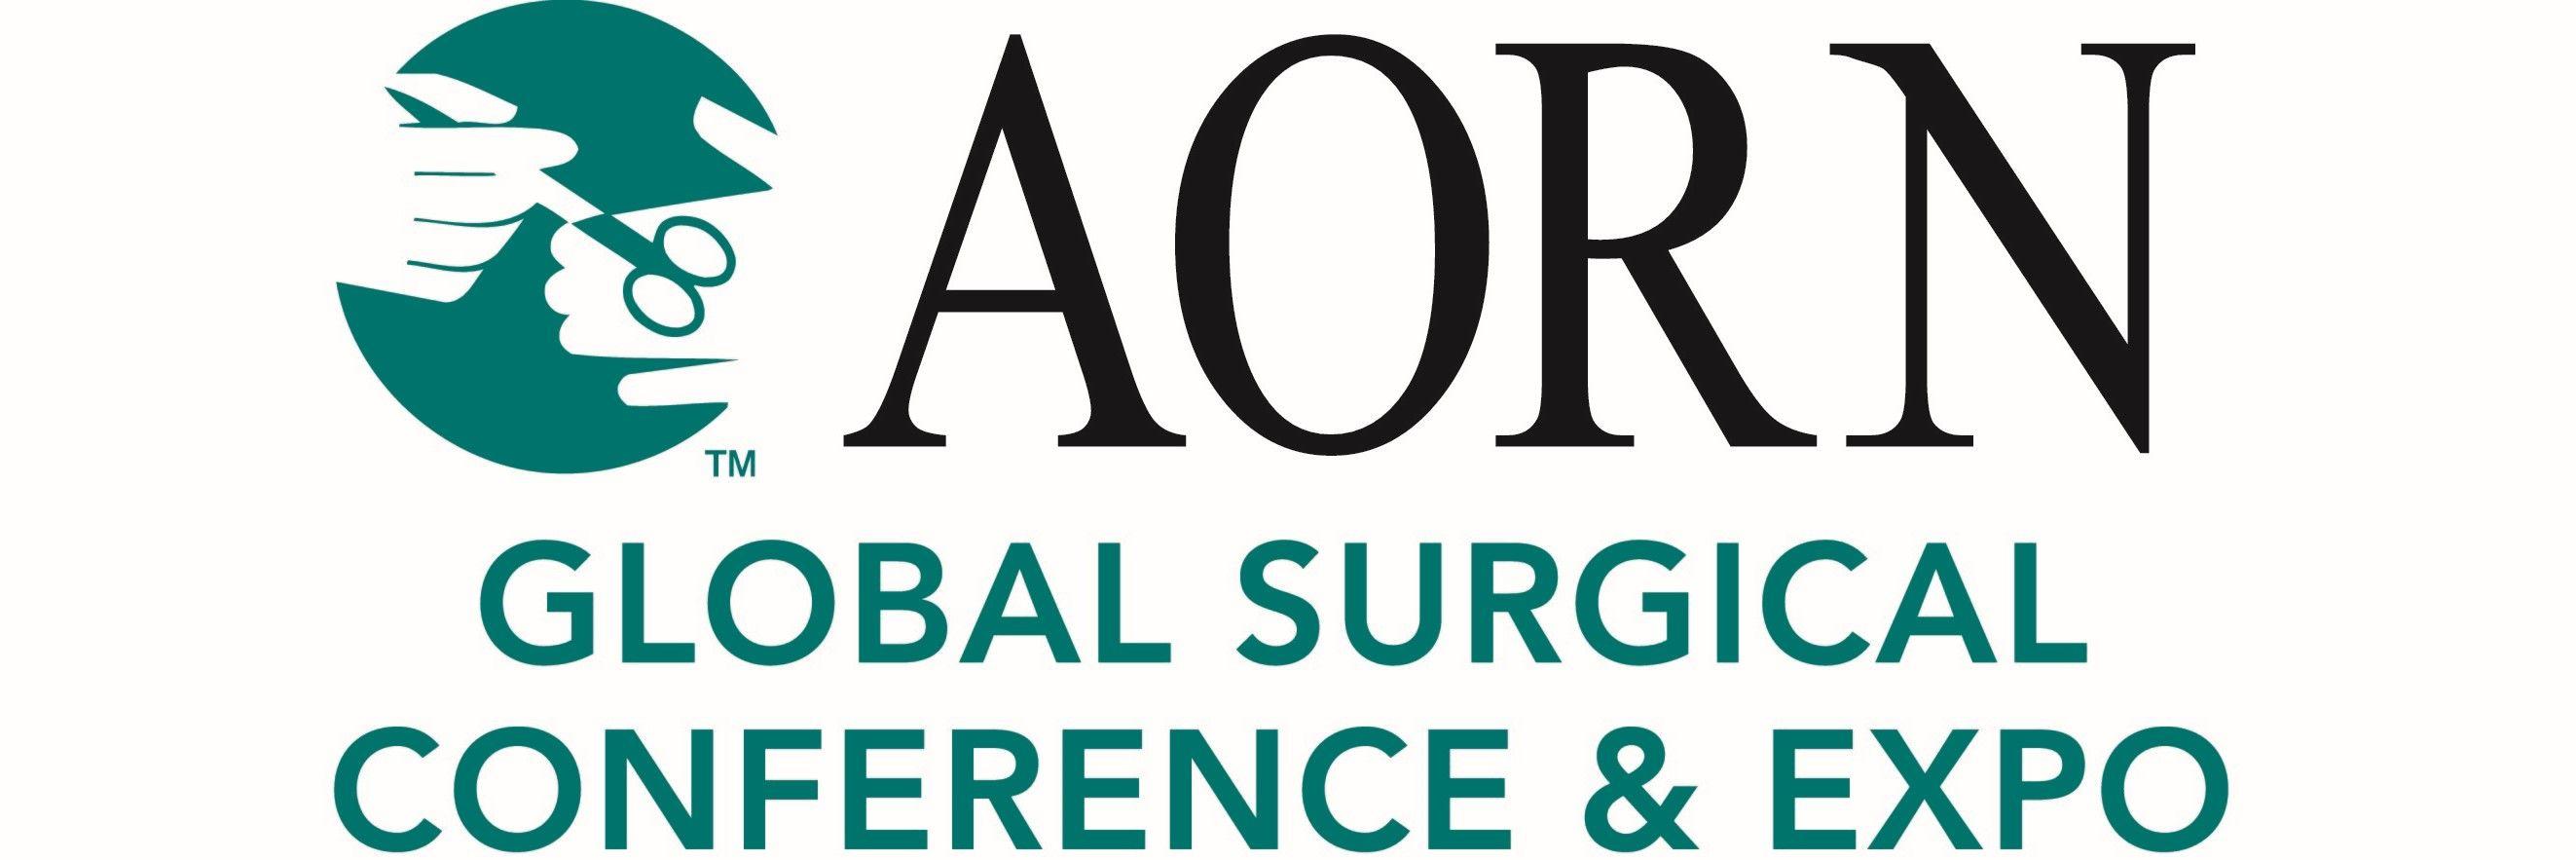 AORN Logo - AORN Surgical Conference & Expo | Solutions Designed For Healthcare ...